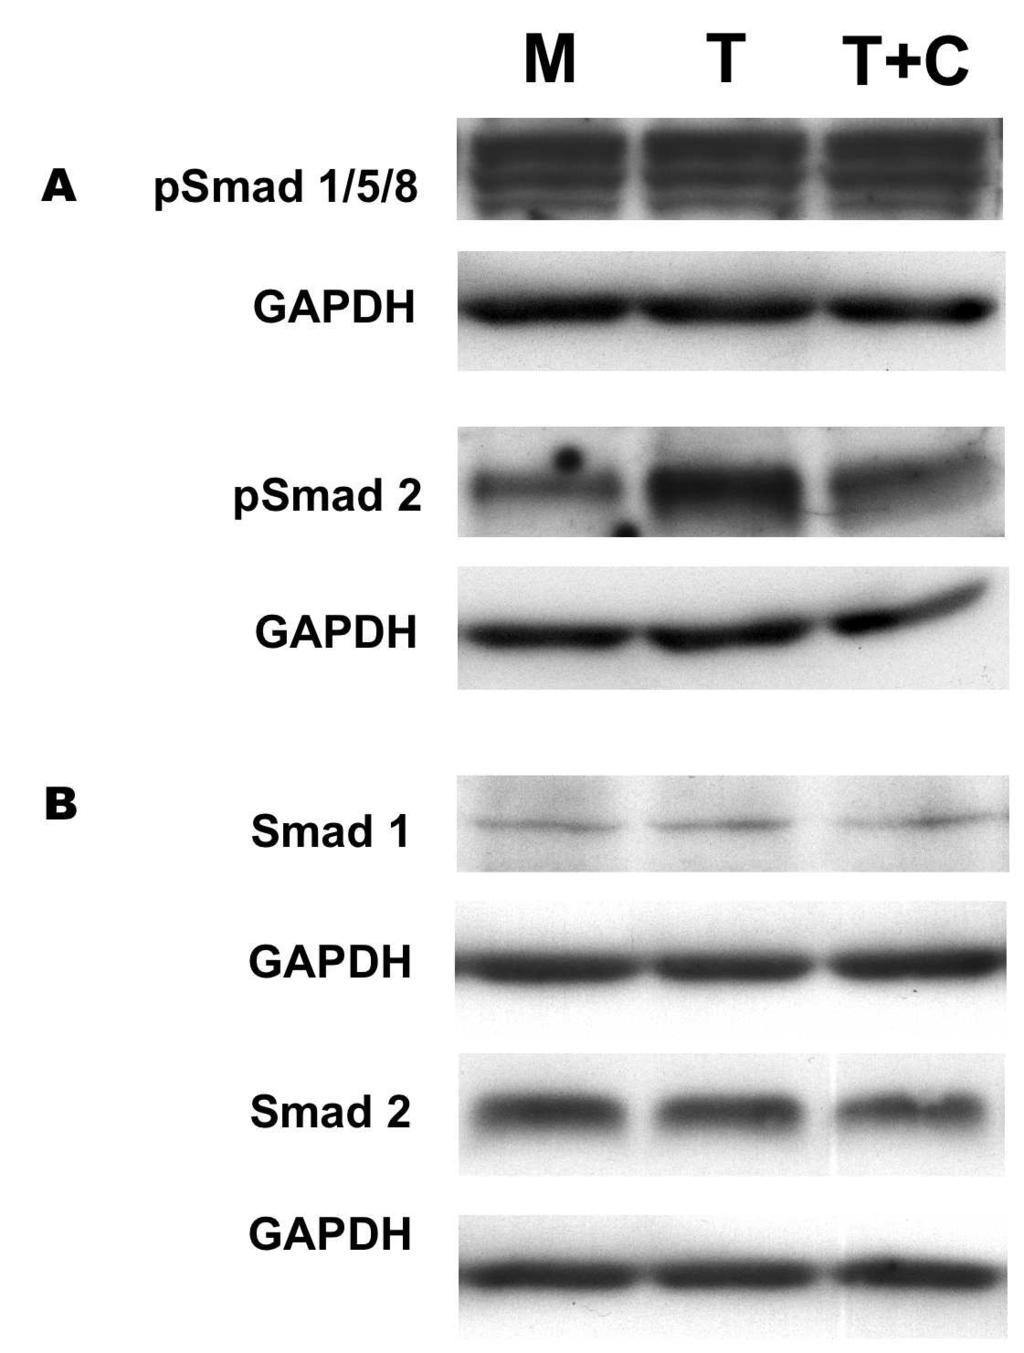 CHAPTER 7 FIGURE 3 C Fig. 3. Influence of L-carnosine on ALK signaling. A: representative Western blot of psmad1/5/8 and psmad2.